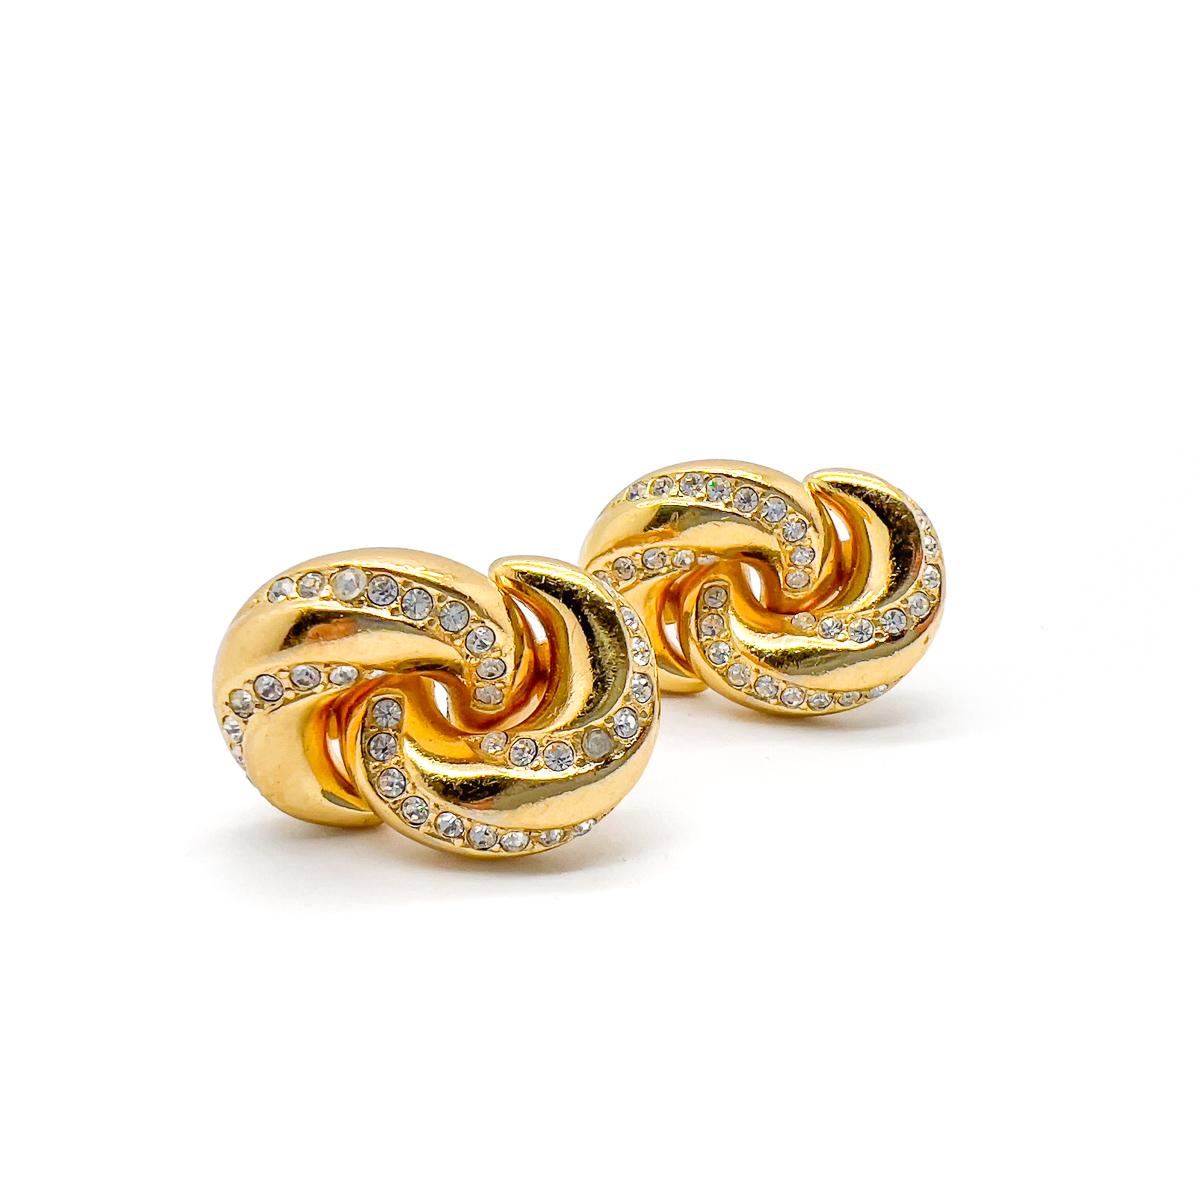 A pair of Vintage Christian Dior Embellished Love Knot Earrings. Featuring entwined gold loops depicting a love knot. The high polish and stone set finishes proving the perfect contrast for eye catching glances. An eternal classic from the House of